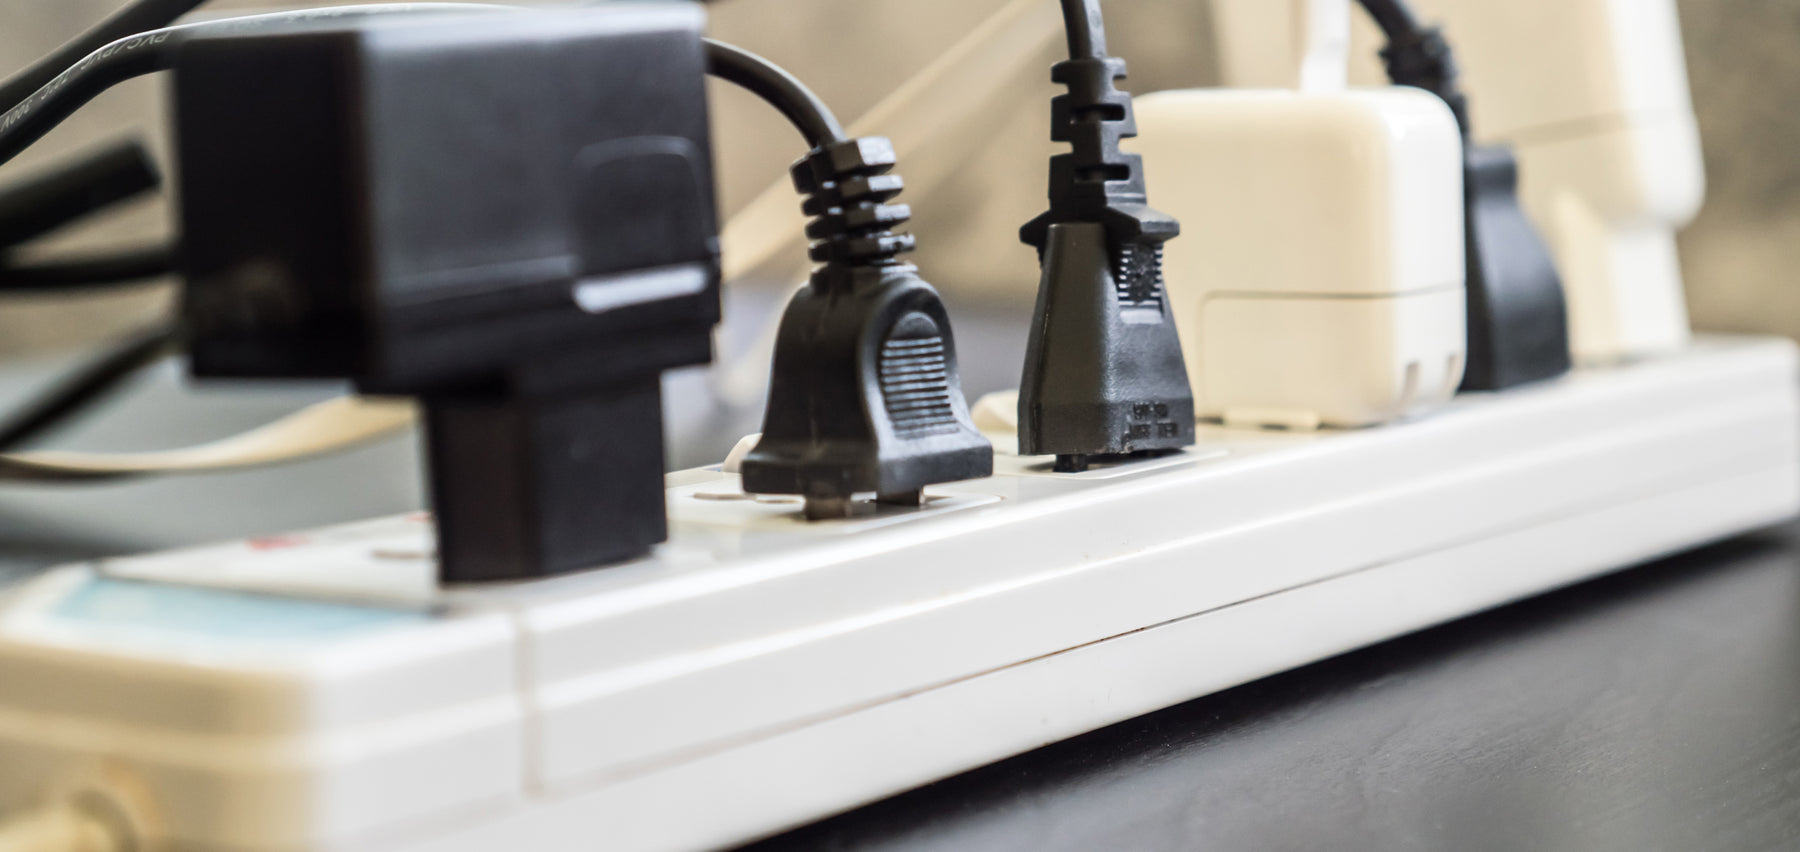 When should I throw away my old surge protector?